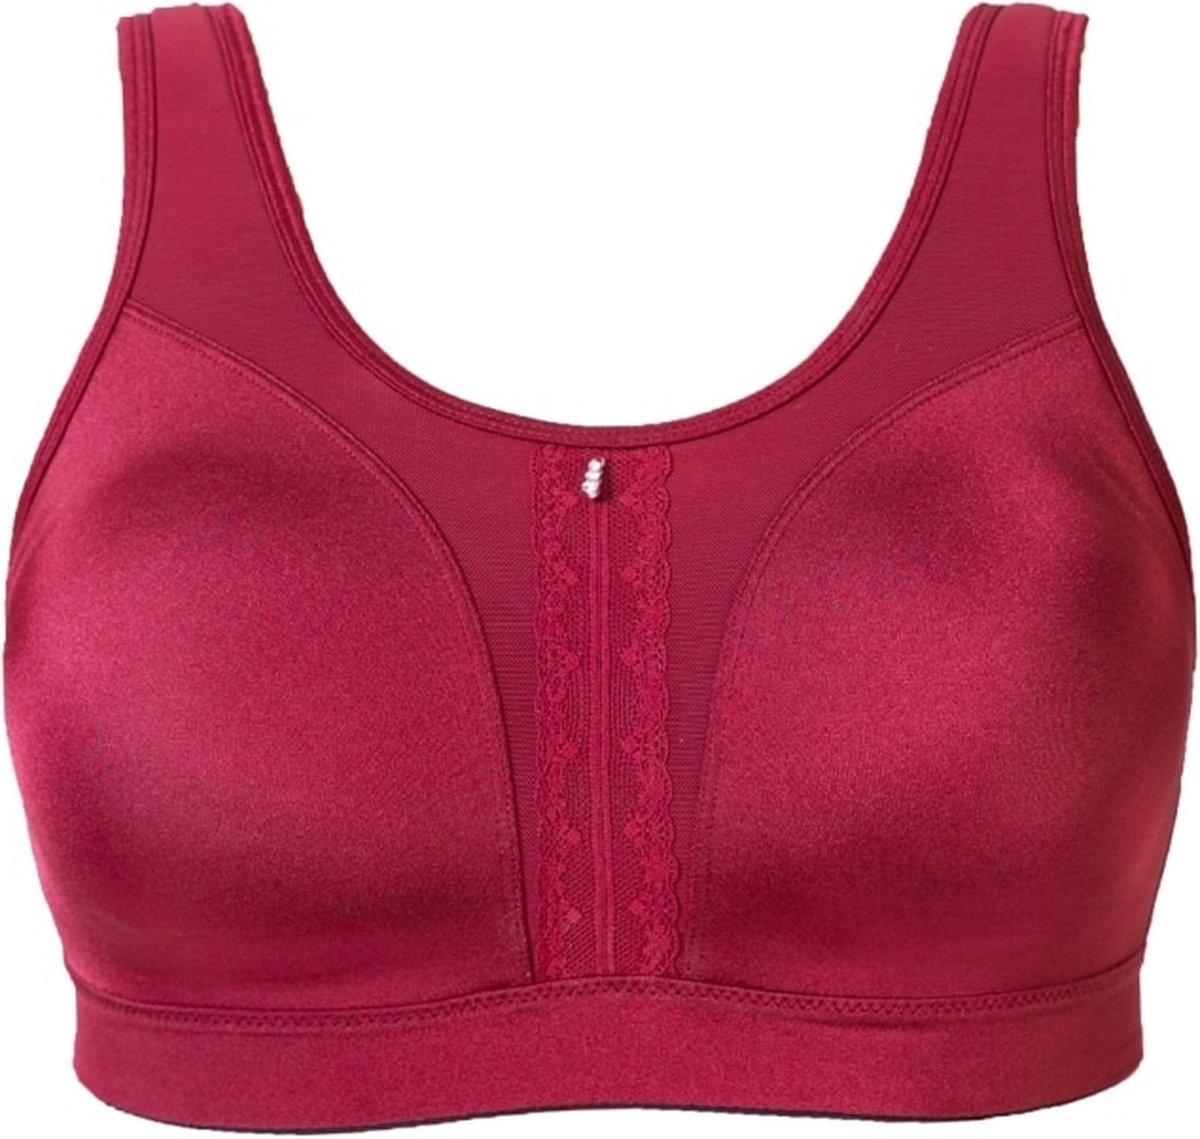 High impact Sport BH (zonder beugel) Cannes, Deep Red / Bordeaux rood, maat: 75H